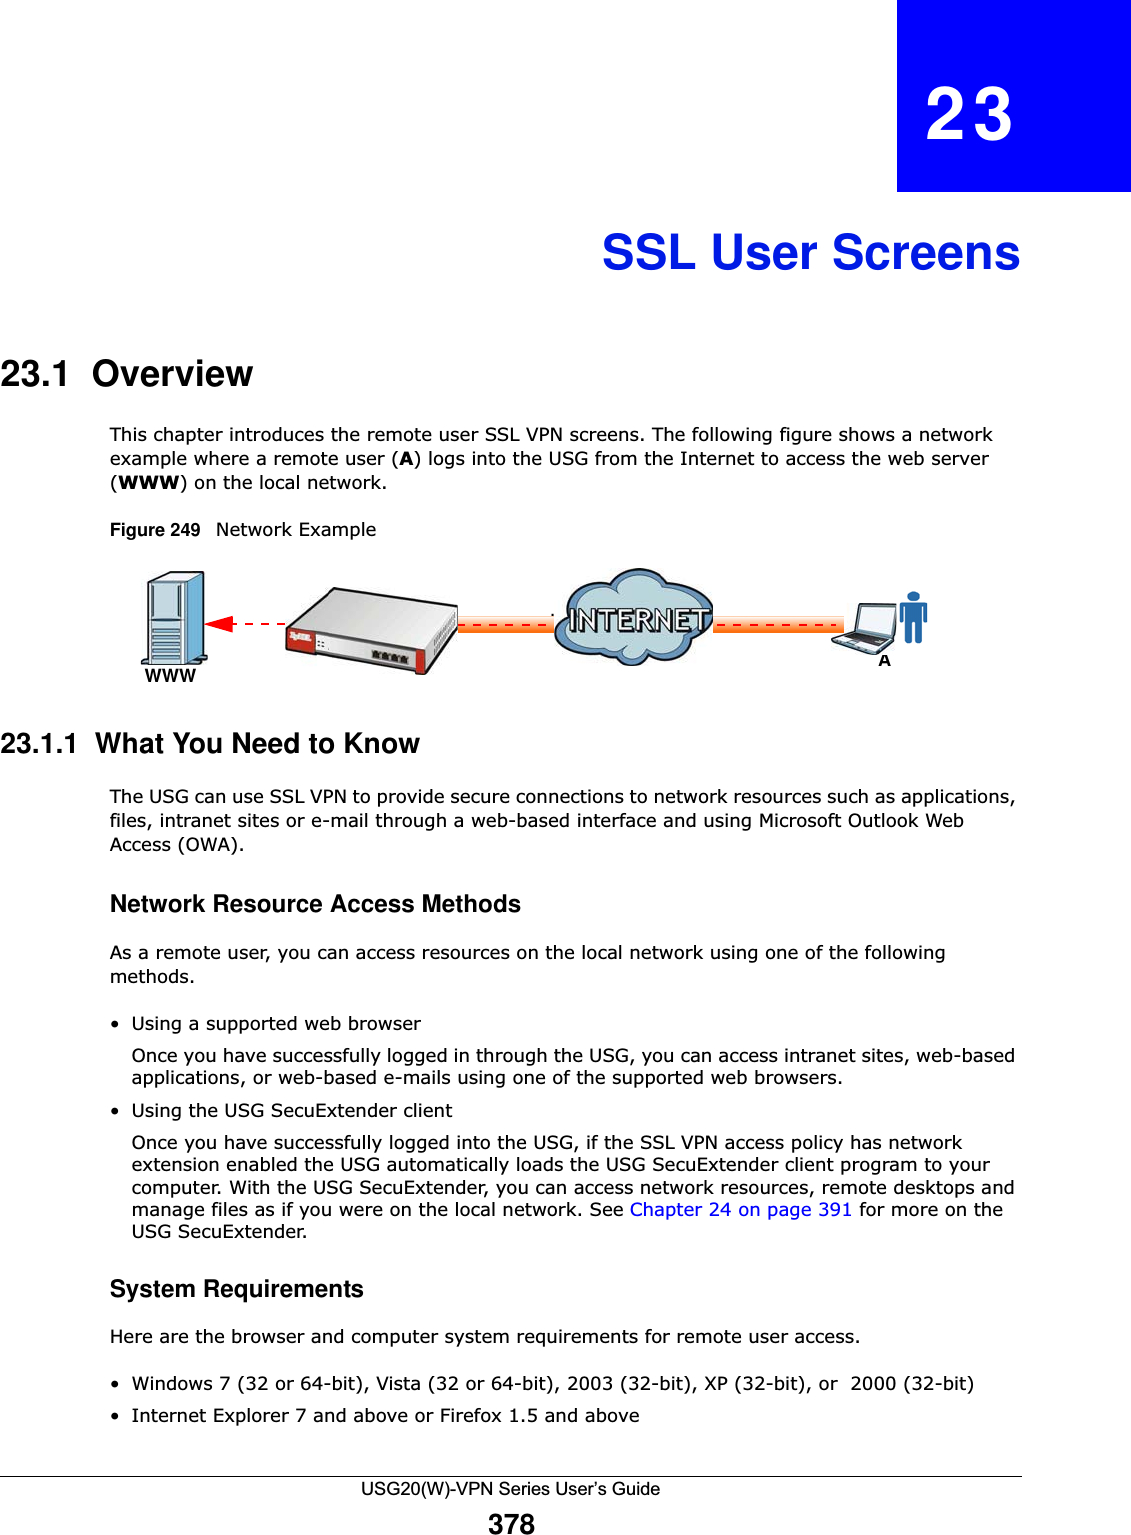 USG20(W)-VPN Series User’s Guide378CHAPTER   23SSL User Screens23.1  OverviewThis chapter introduces the remote user SSL VPN screens. The following figure shows a network example where a remote user (A) logs into the USG from the Internet to access the web server (WWW) on the local network.  Figure 249   Network Example 23.1.1  What You Need to KnowThe USG can use SSL VPN to provide secure connections to network resources such as applications, files, intranet sites or e-mail through a web-based interface and using Microsoft Outlook Web Access (OWA). Network Resource Access MethodsAs a remote user, you can access resources on the local network using one of the following methods. • Using a supported web browser Once you have successfully logged in through the USG, you can access intranet sites, web-based applications, or web-based e-mails using one of the supported web browsers. • Using the USG SecuExtender clientOnce you have successfully logged into the USG, if the SSL VPN access policy has network extension enabled the USG automatically loads the USG SecuExtender client program to your computer. With the USG SecuExtender, you can access network resources, remote desktops and manage files as if you were on the local network. See Chapter 24 on page 391 for more on the USG SecuExtender.System RequirementsHere are the browser and computer system requirements for remote user access. • Windows 7 (32 or 64-bit), Vista (32 or 64-bit), 2003 (32-bit), XP (32-bit), or  2000 (32-bit) • Internet Explorer 7 and above or Firefox 1.5 and aboveAWWWInternet